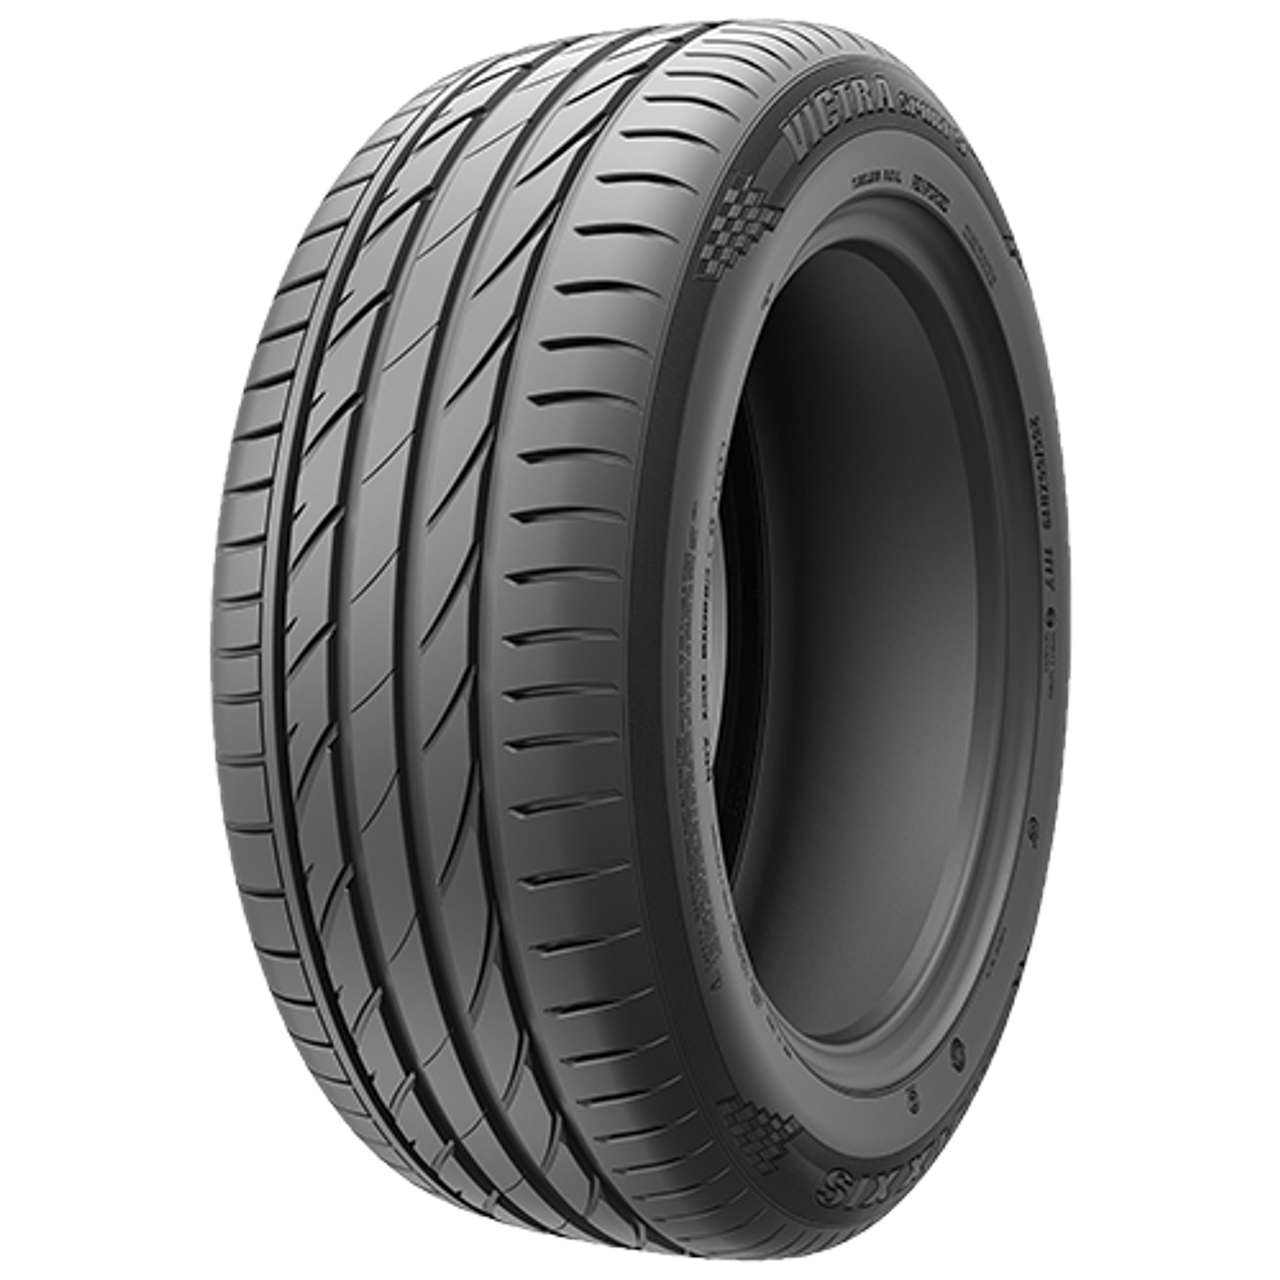 MAXXIS VICTRA SPORT 5 (VS5) SUV 295/35ZR21 107Y MFS BSW